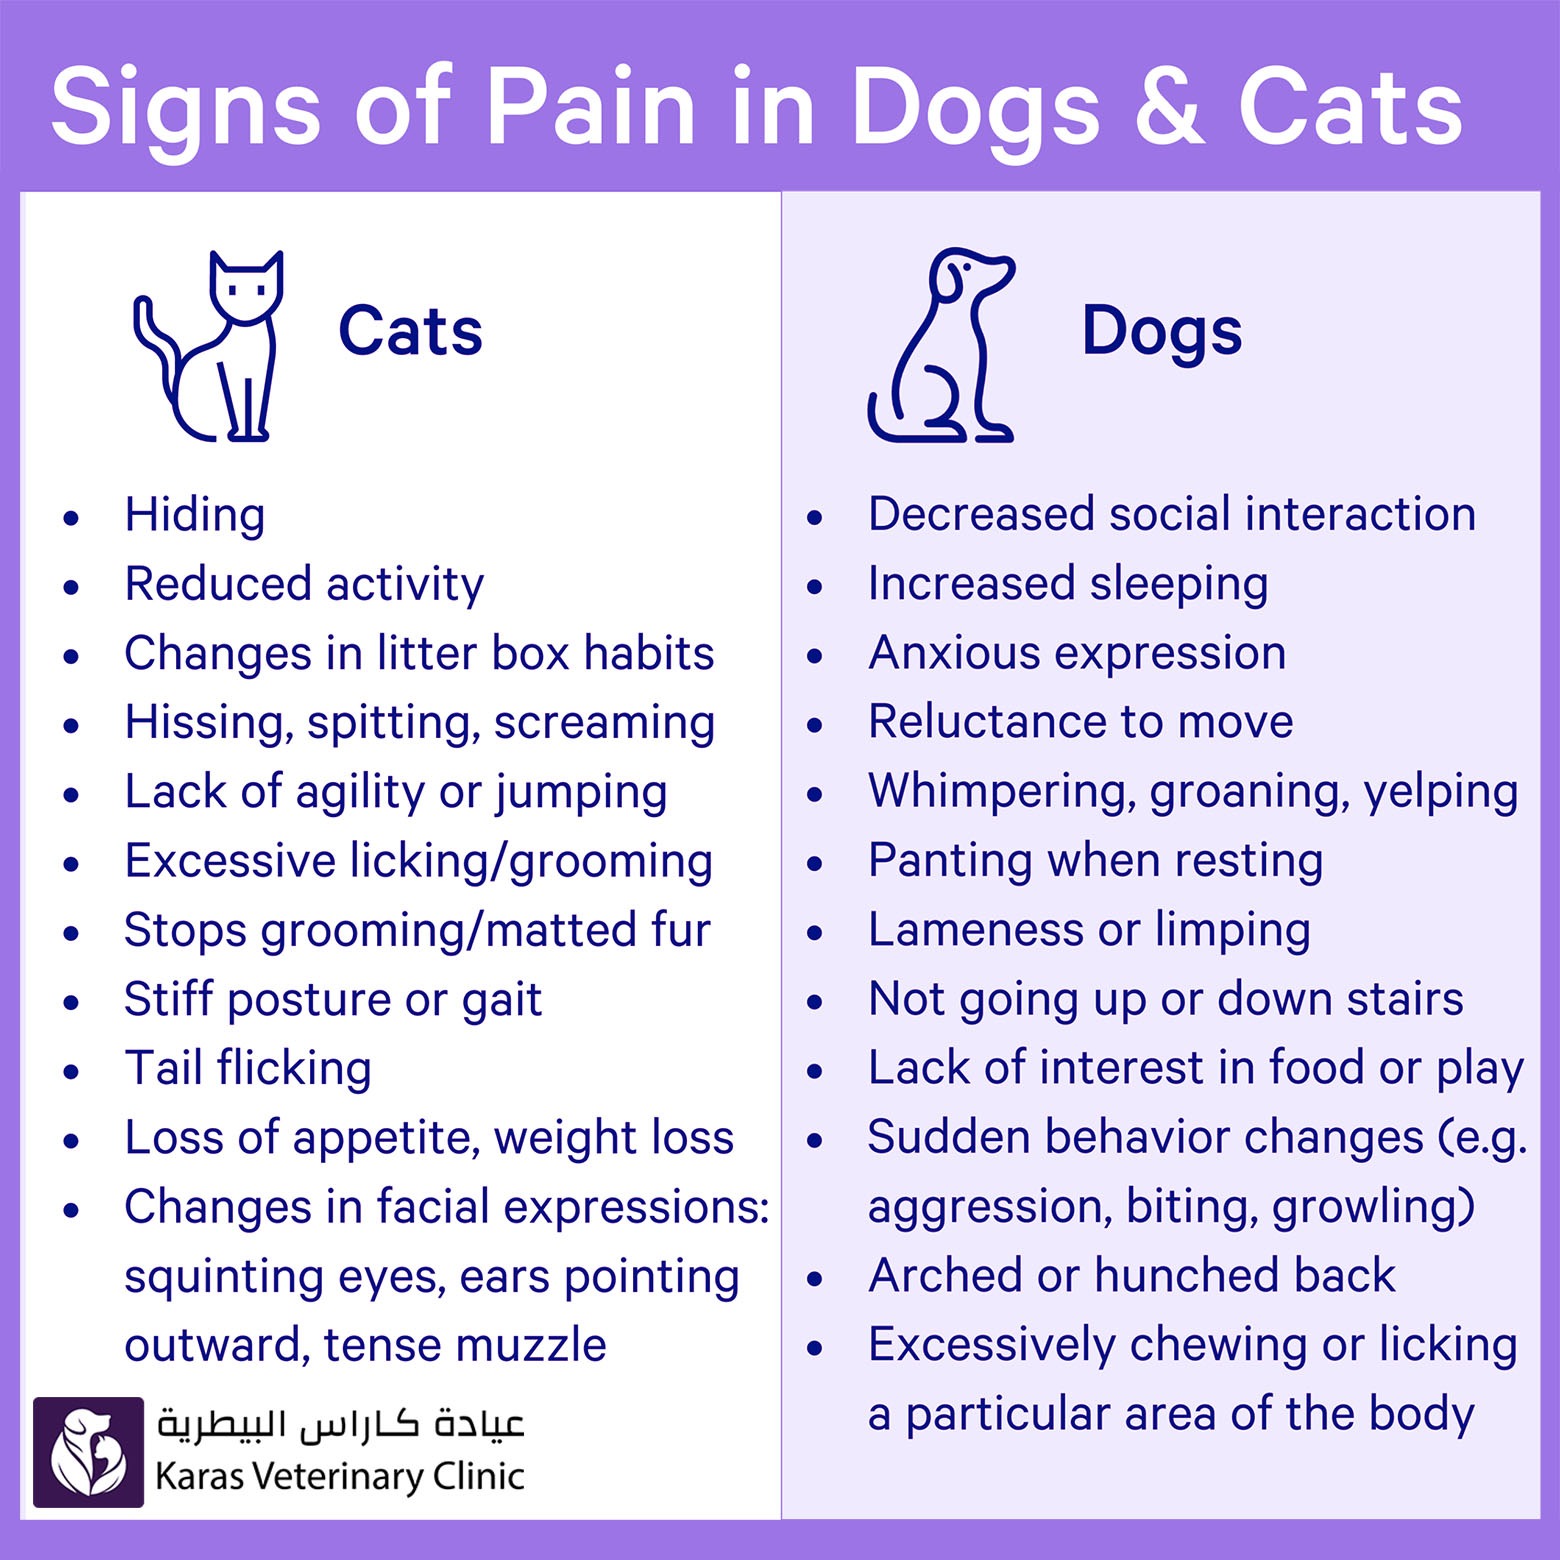 Signs of pain in dogs and cats